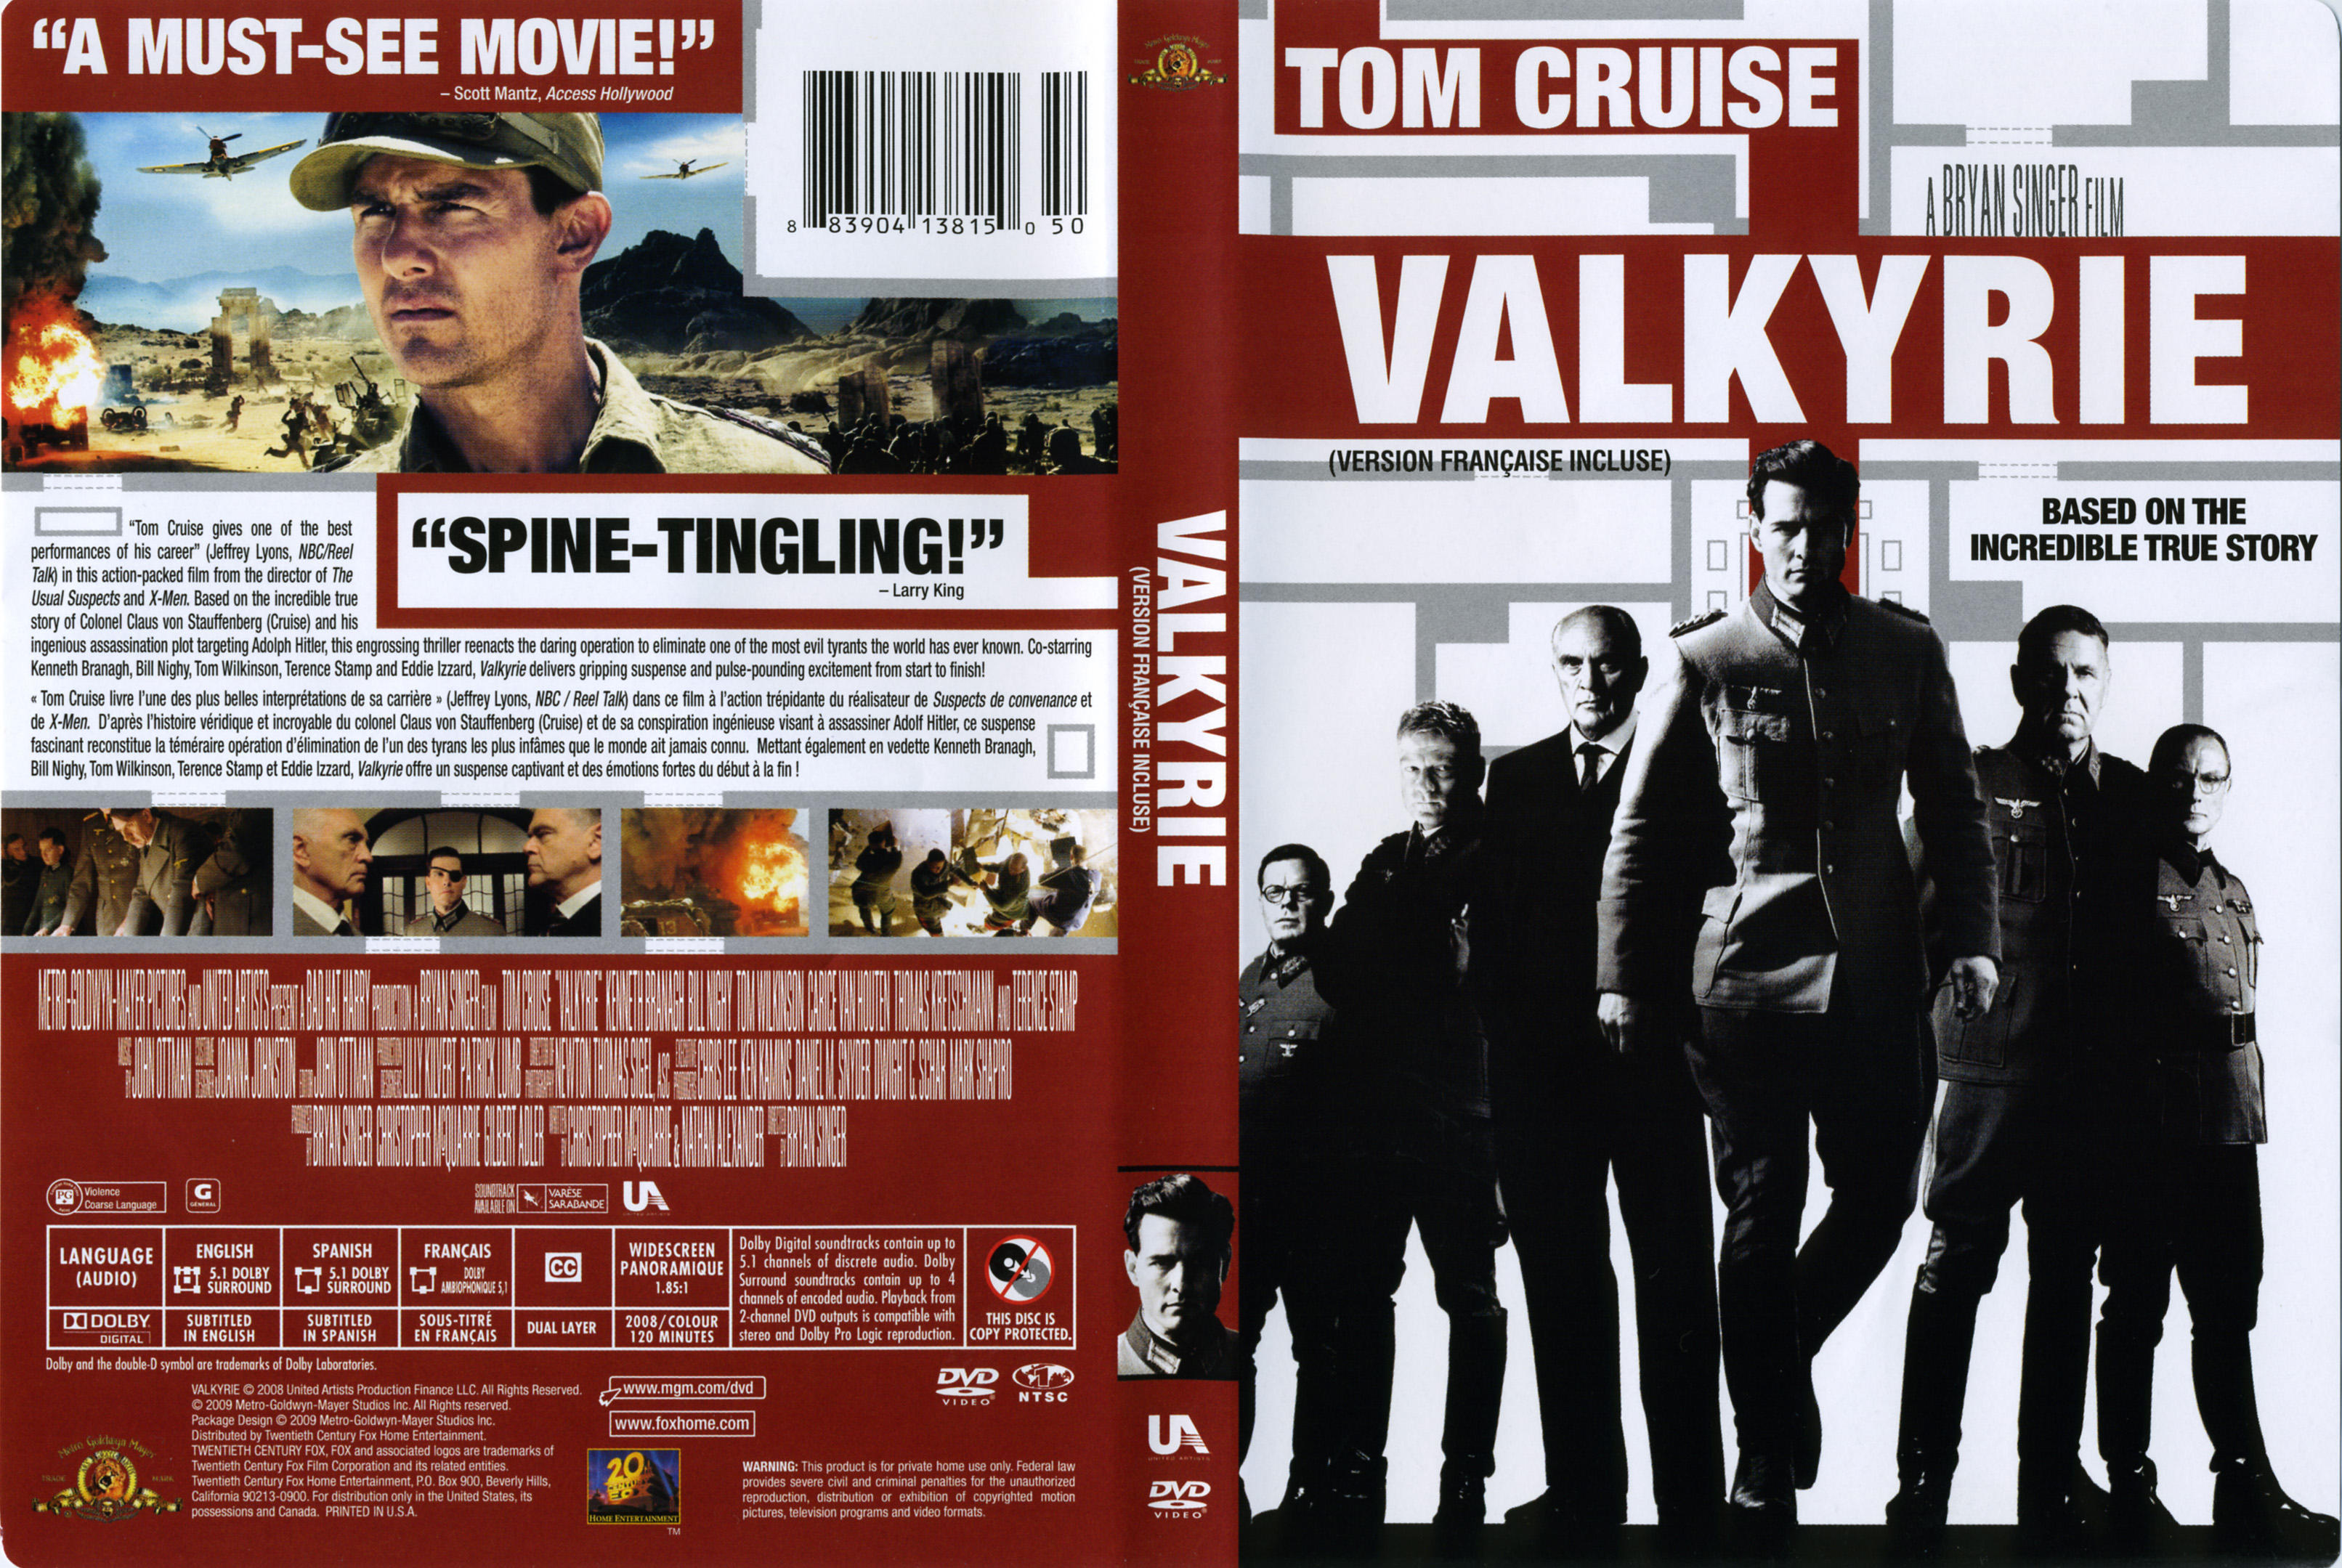 Jaquette DVD Valkyrie (Canadienne)